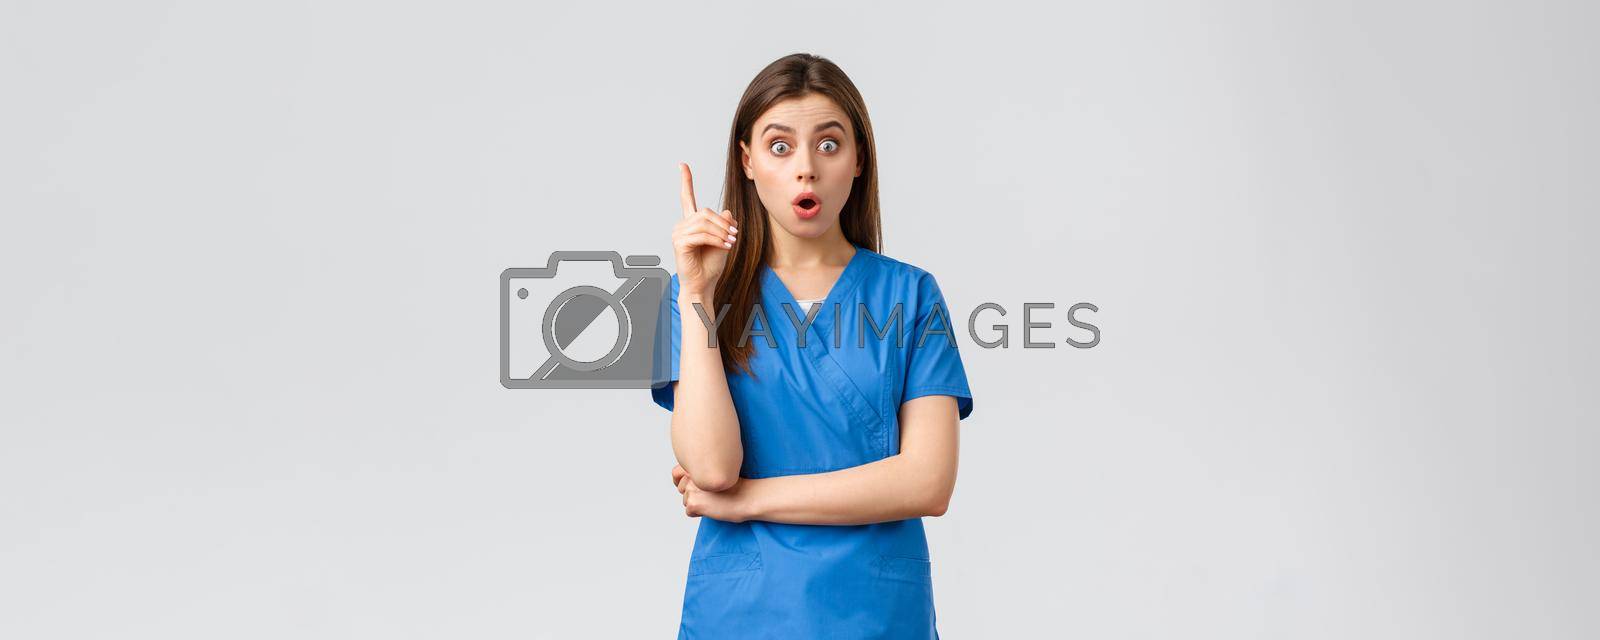 Healthcare workers, prevent virus, insurance and medicine concept. Excited female nurse or doctor in blue scrubs lift one finger, have idea, great thought or suggestion, found solution.